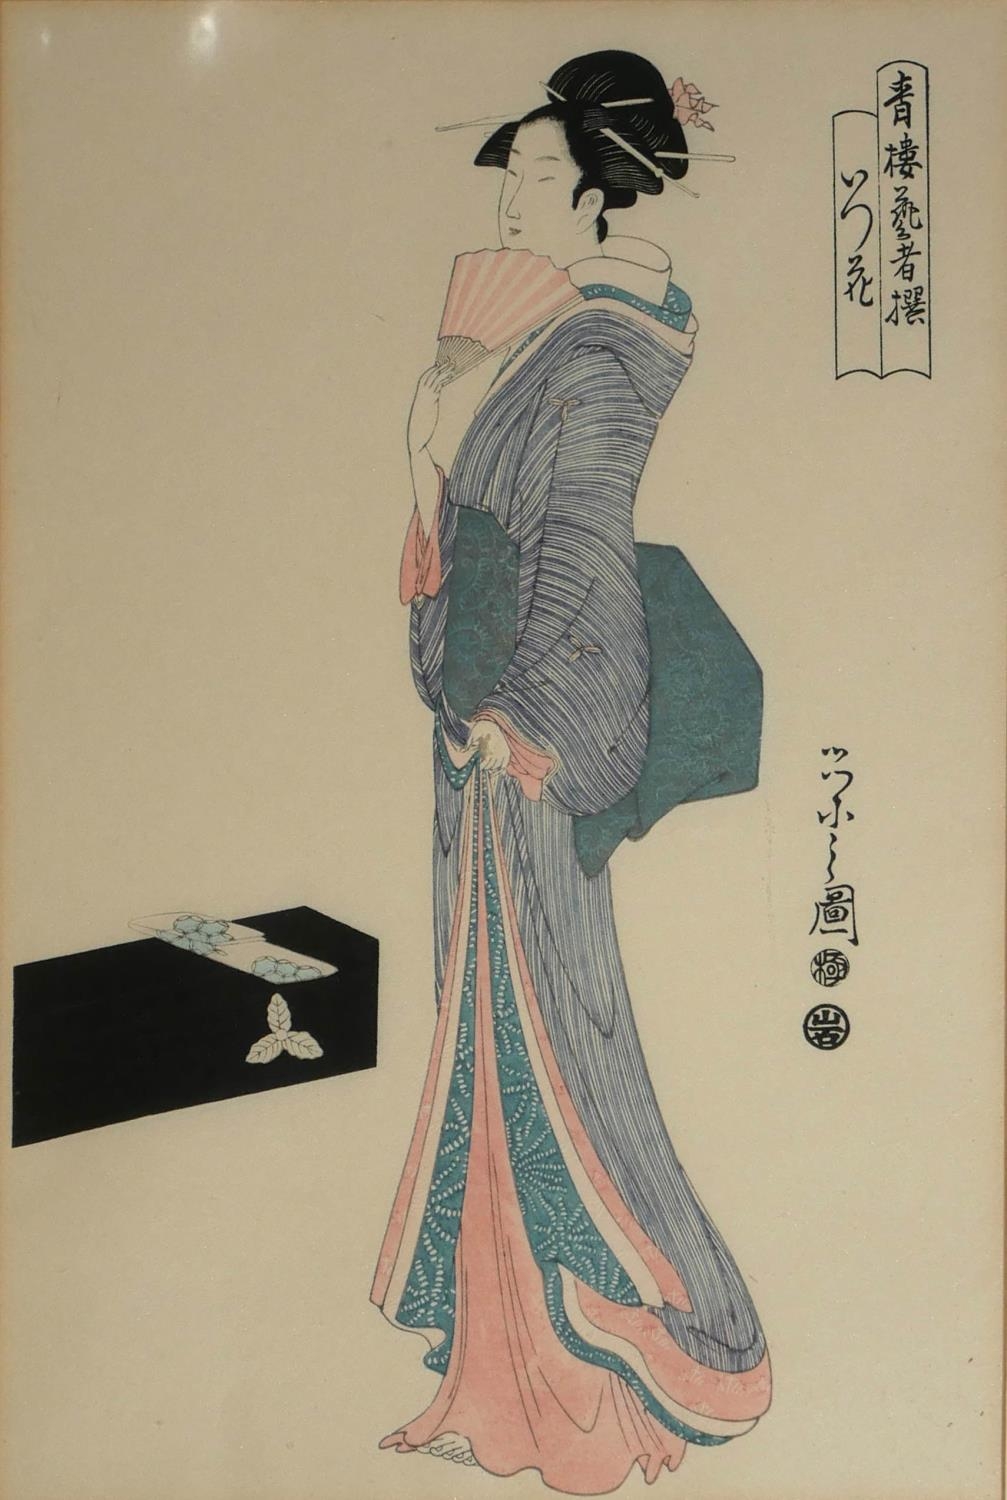 A PAIR OF EARLY 20TH CENTURY JAPANESE SHOWA PERIOD 1926 - 1989 WOODBLOCK PRINTS Both depicting - Image 3 of 3